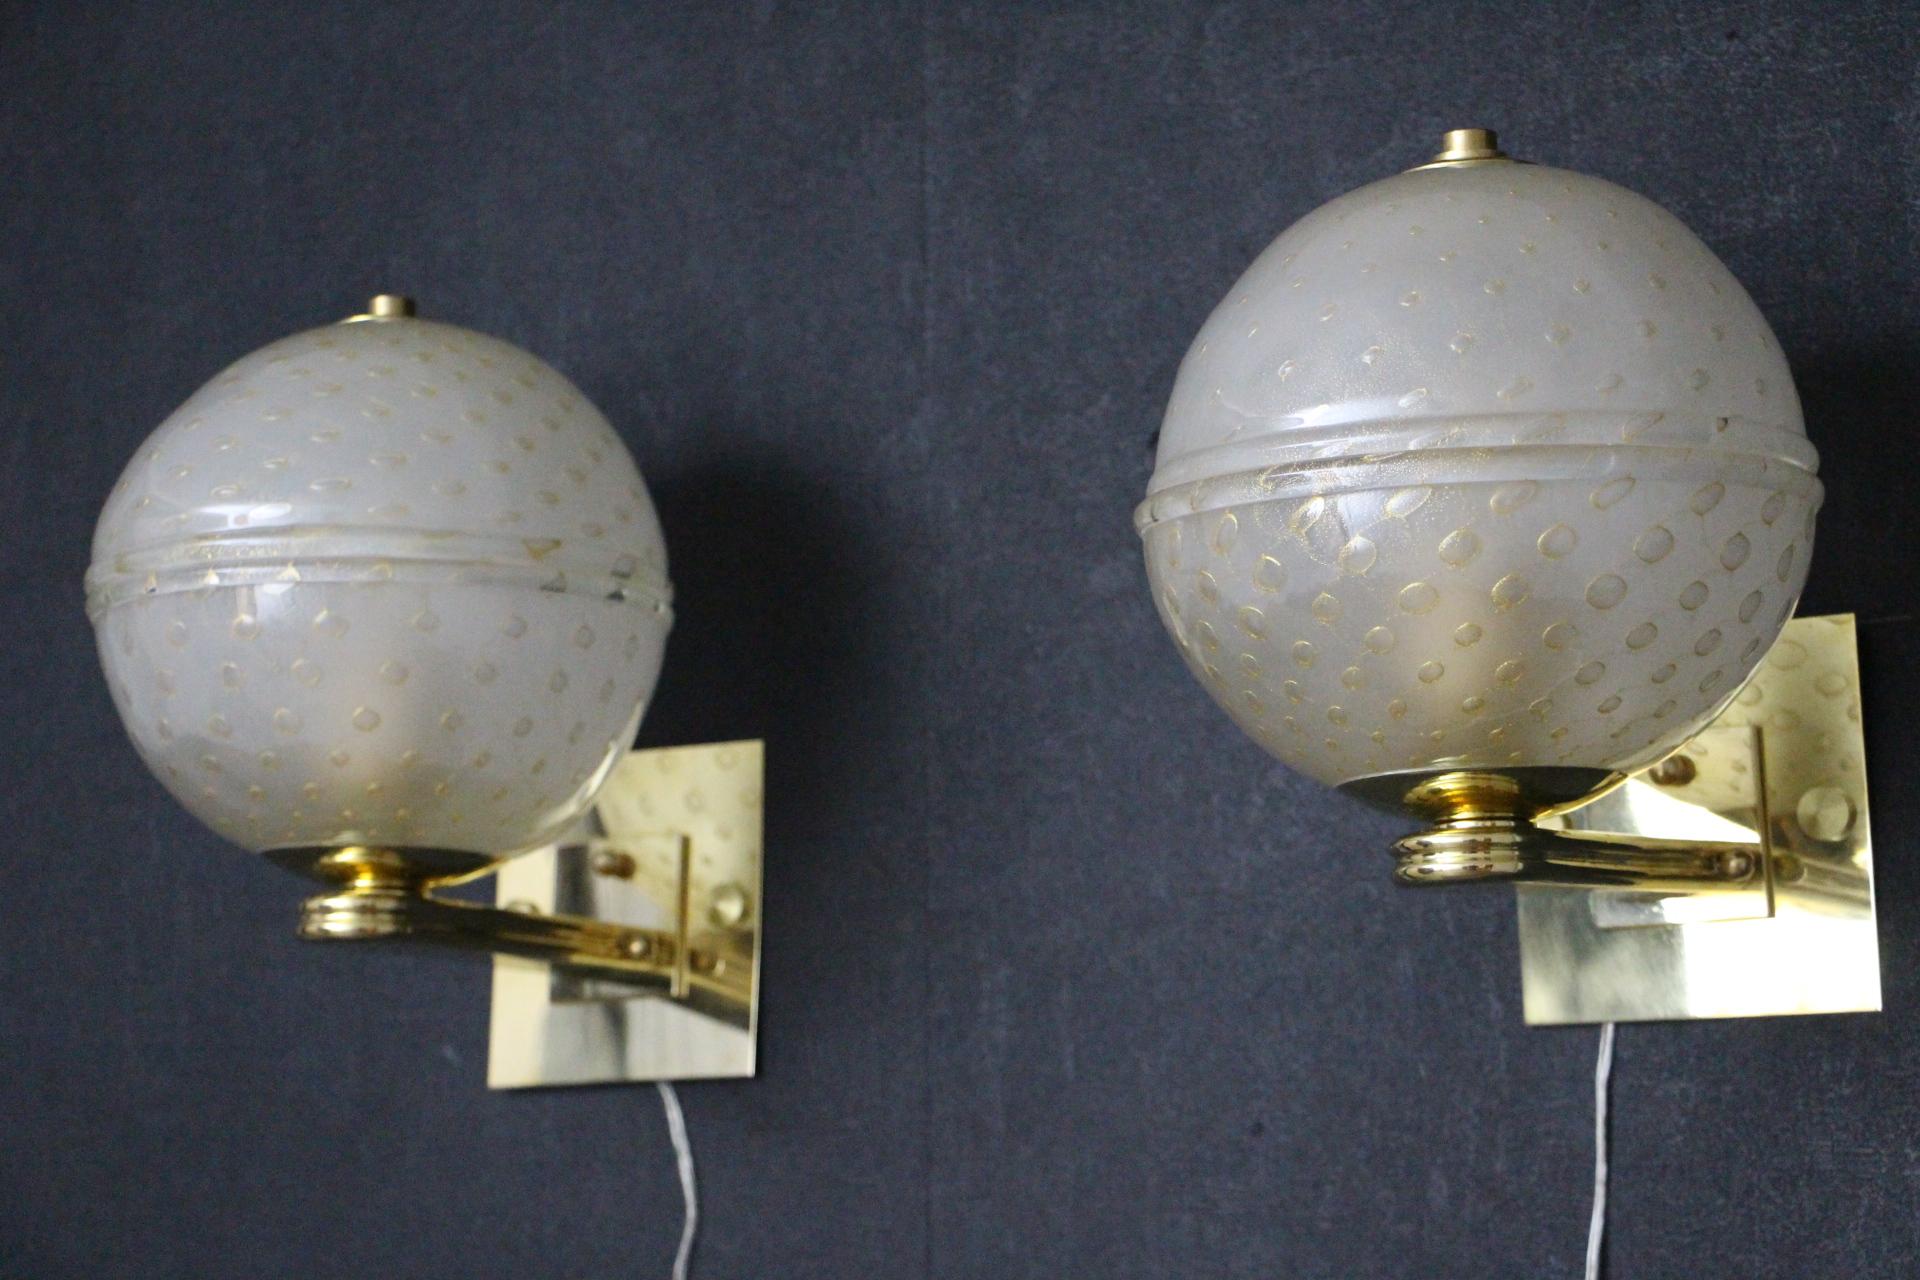 This fabulous pair of Venetian sconces of modern midcentury or Art Deco style, was entirely handcrafted. It is all decorated with the Pulegoso technique. It means that it features big air bubbles inside its high quality blown glass, worked with